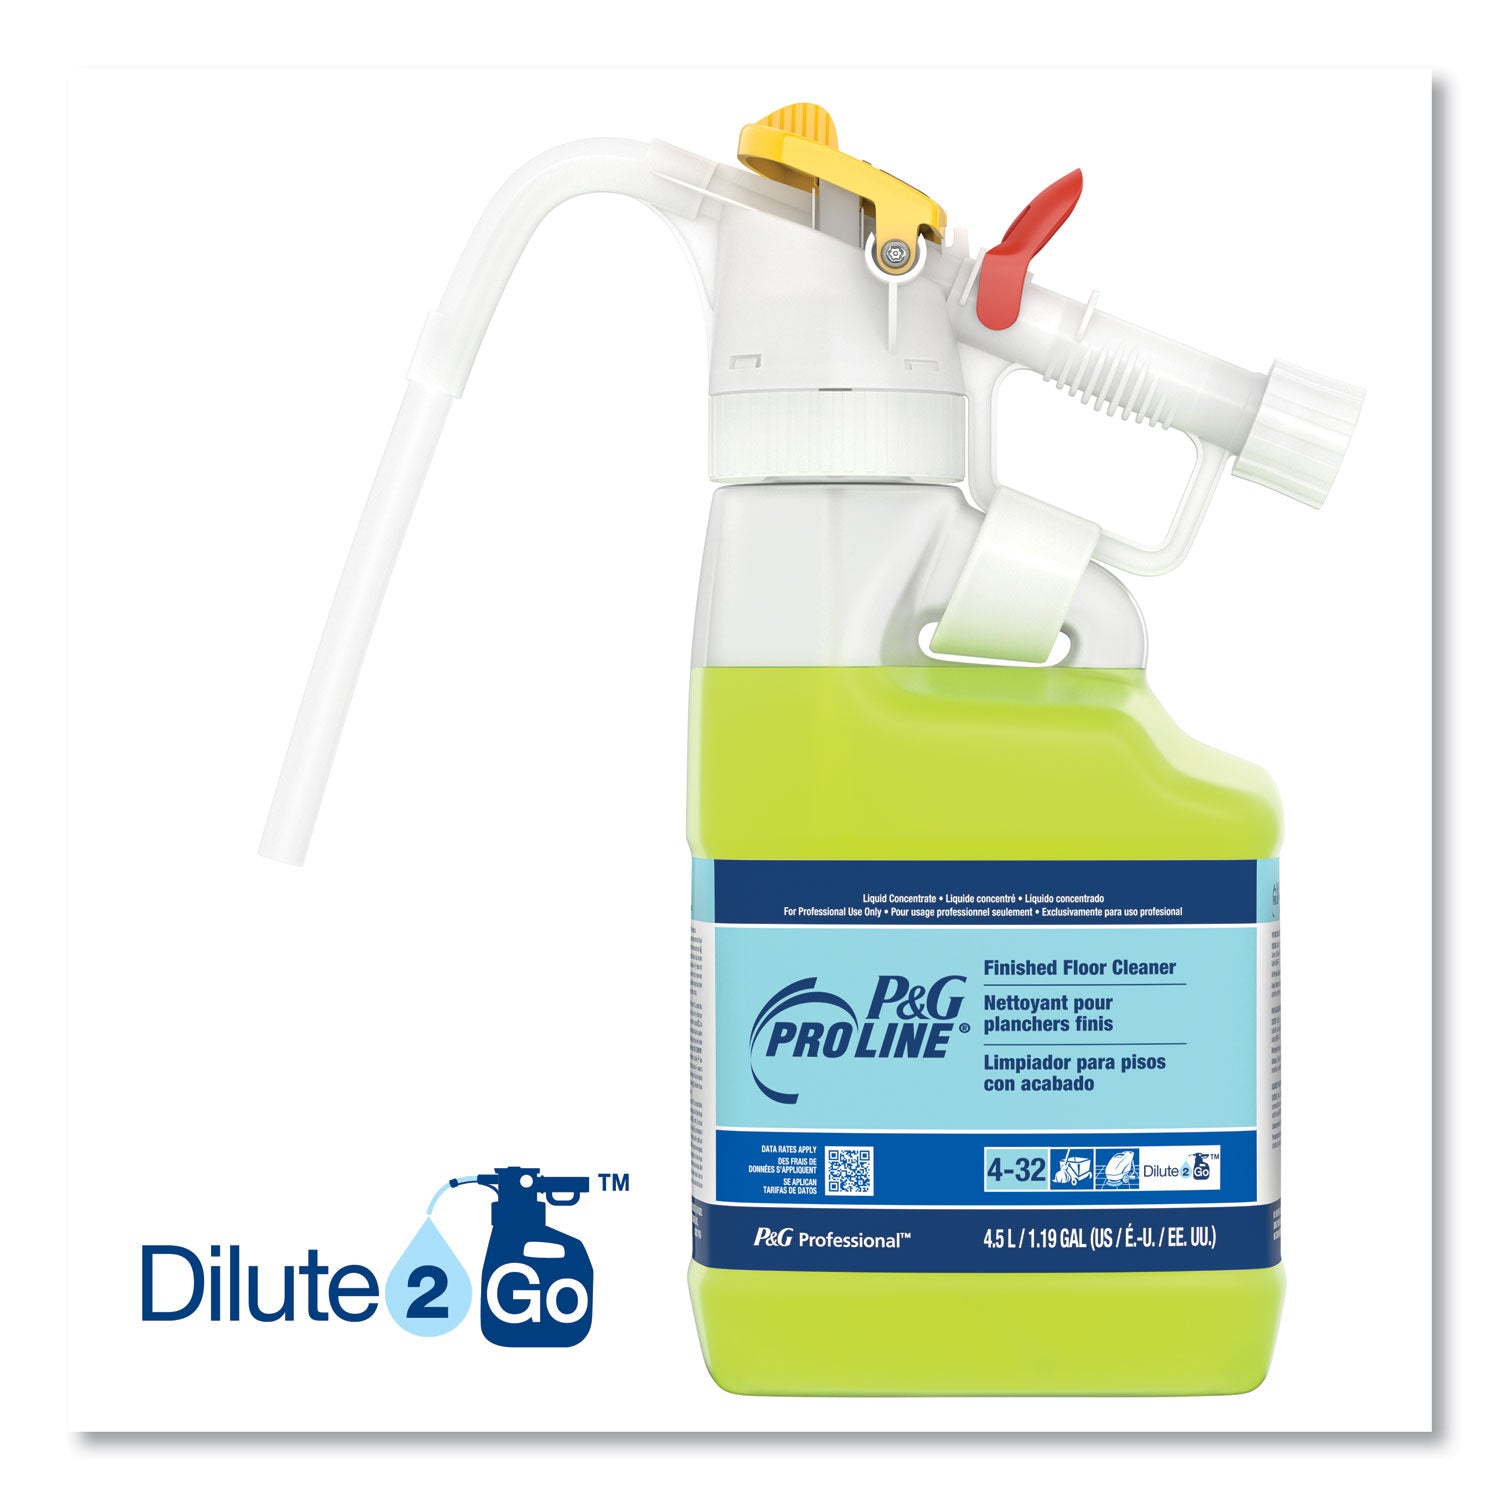 dilute-2-go-p-and-g-pro-line-finished-floor-cleaner-fresh-scent-45-l-jug-1-carton_pgc72003 - 2